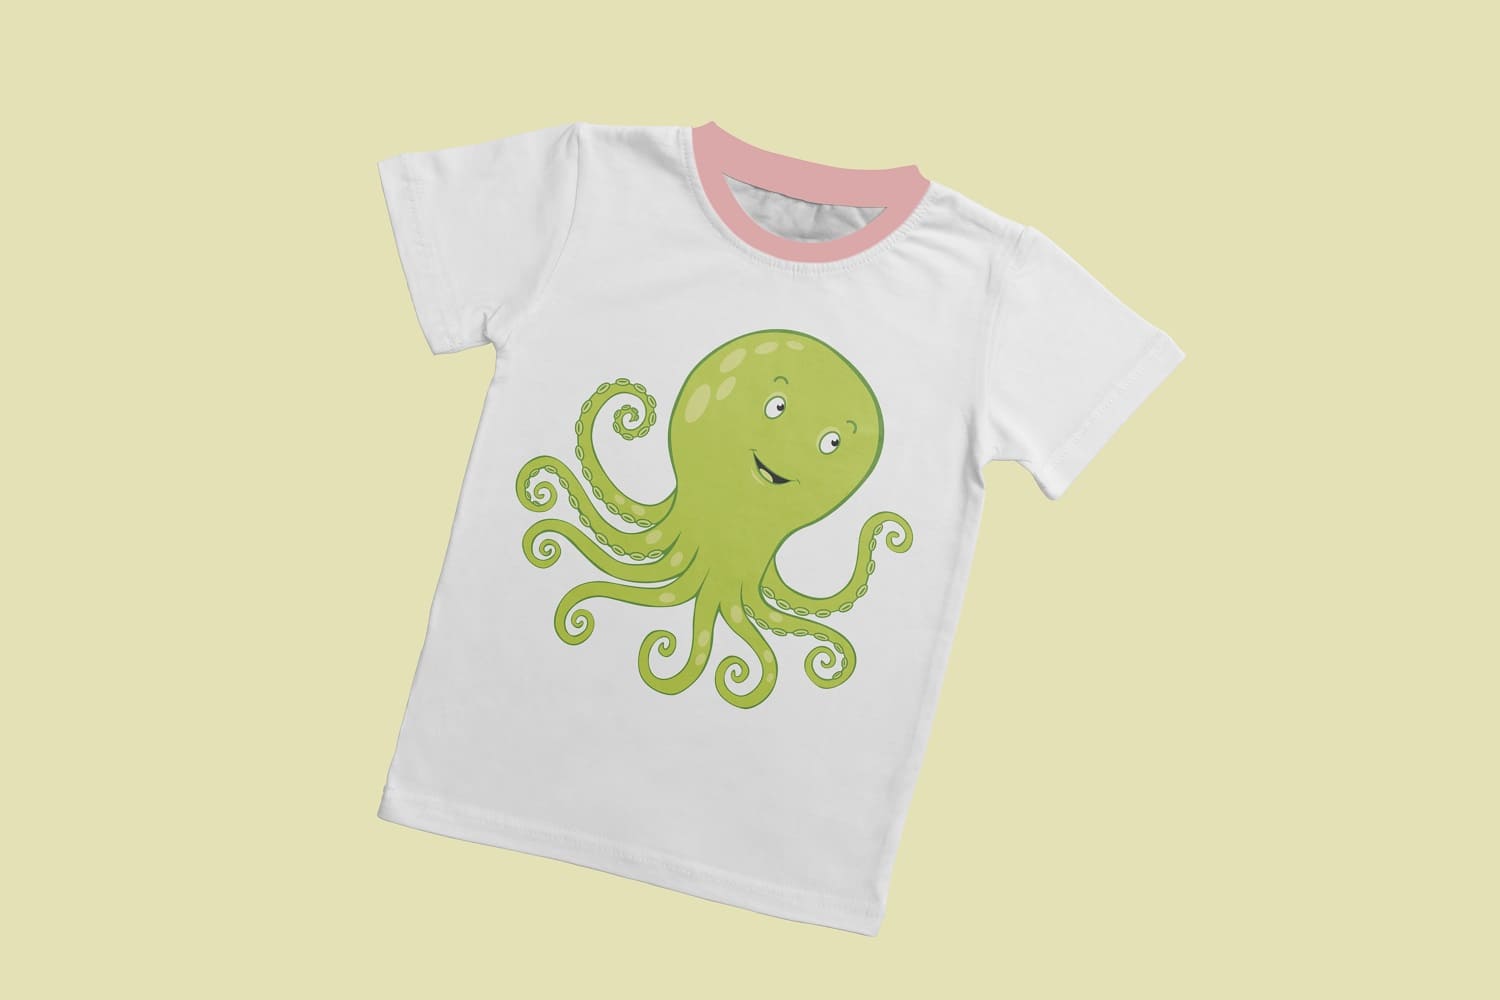 White T-shirt with cute green octopus design.